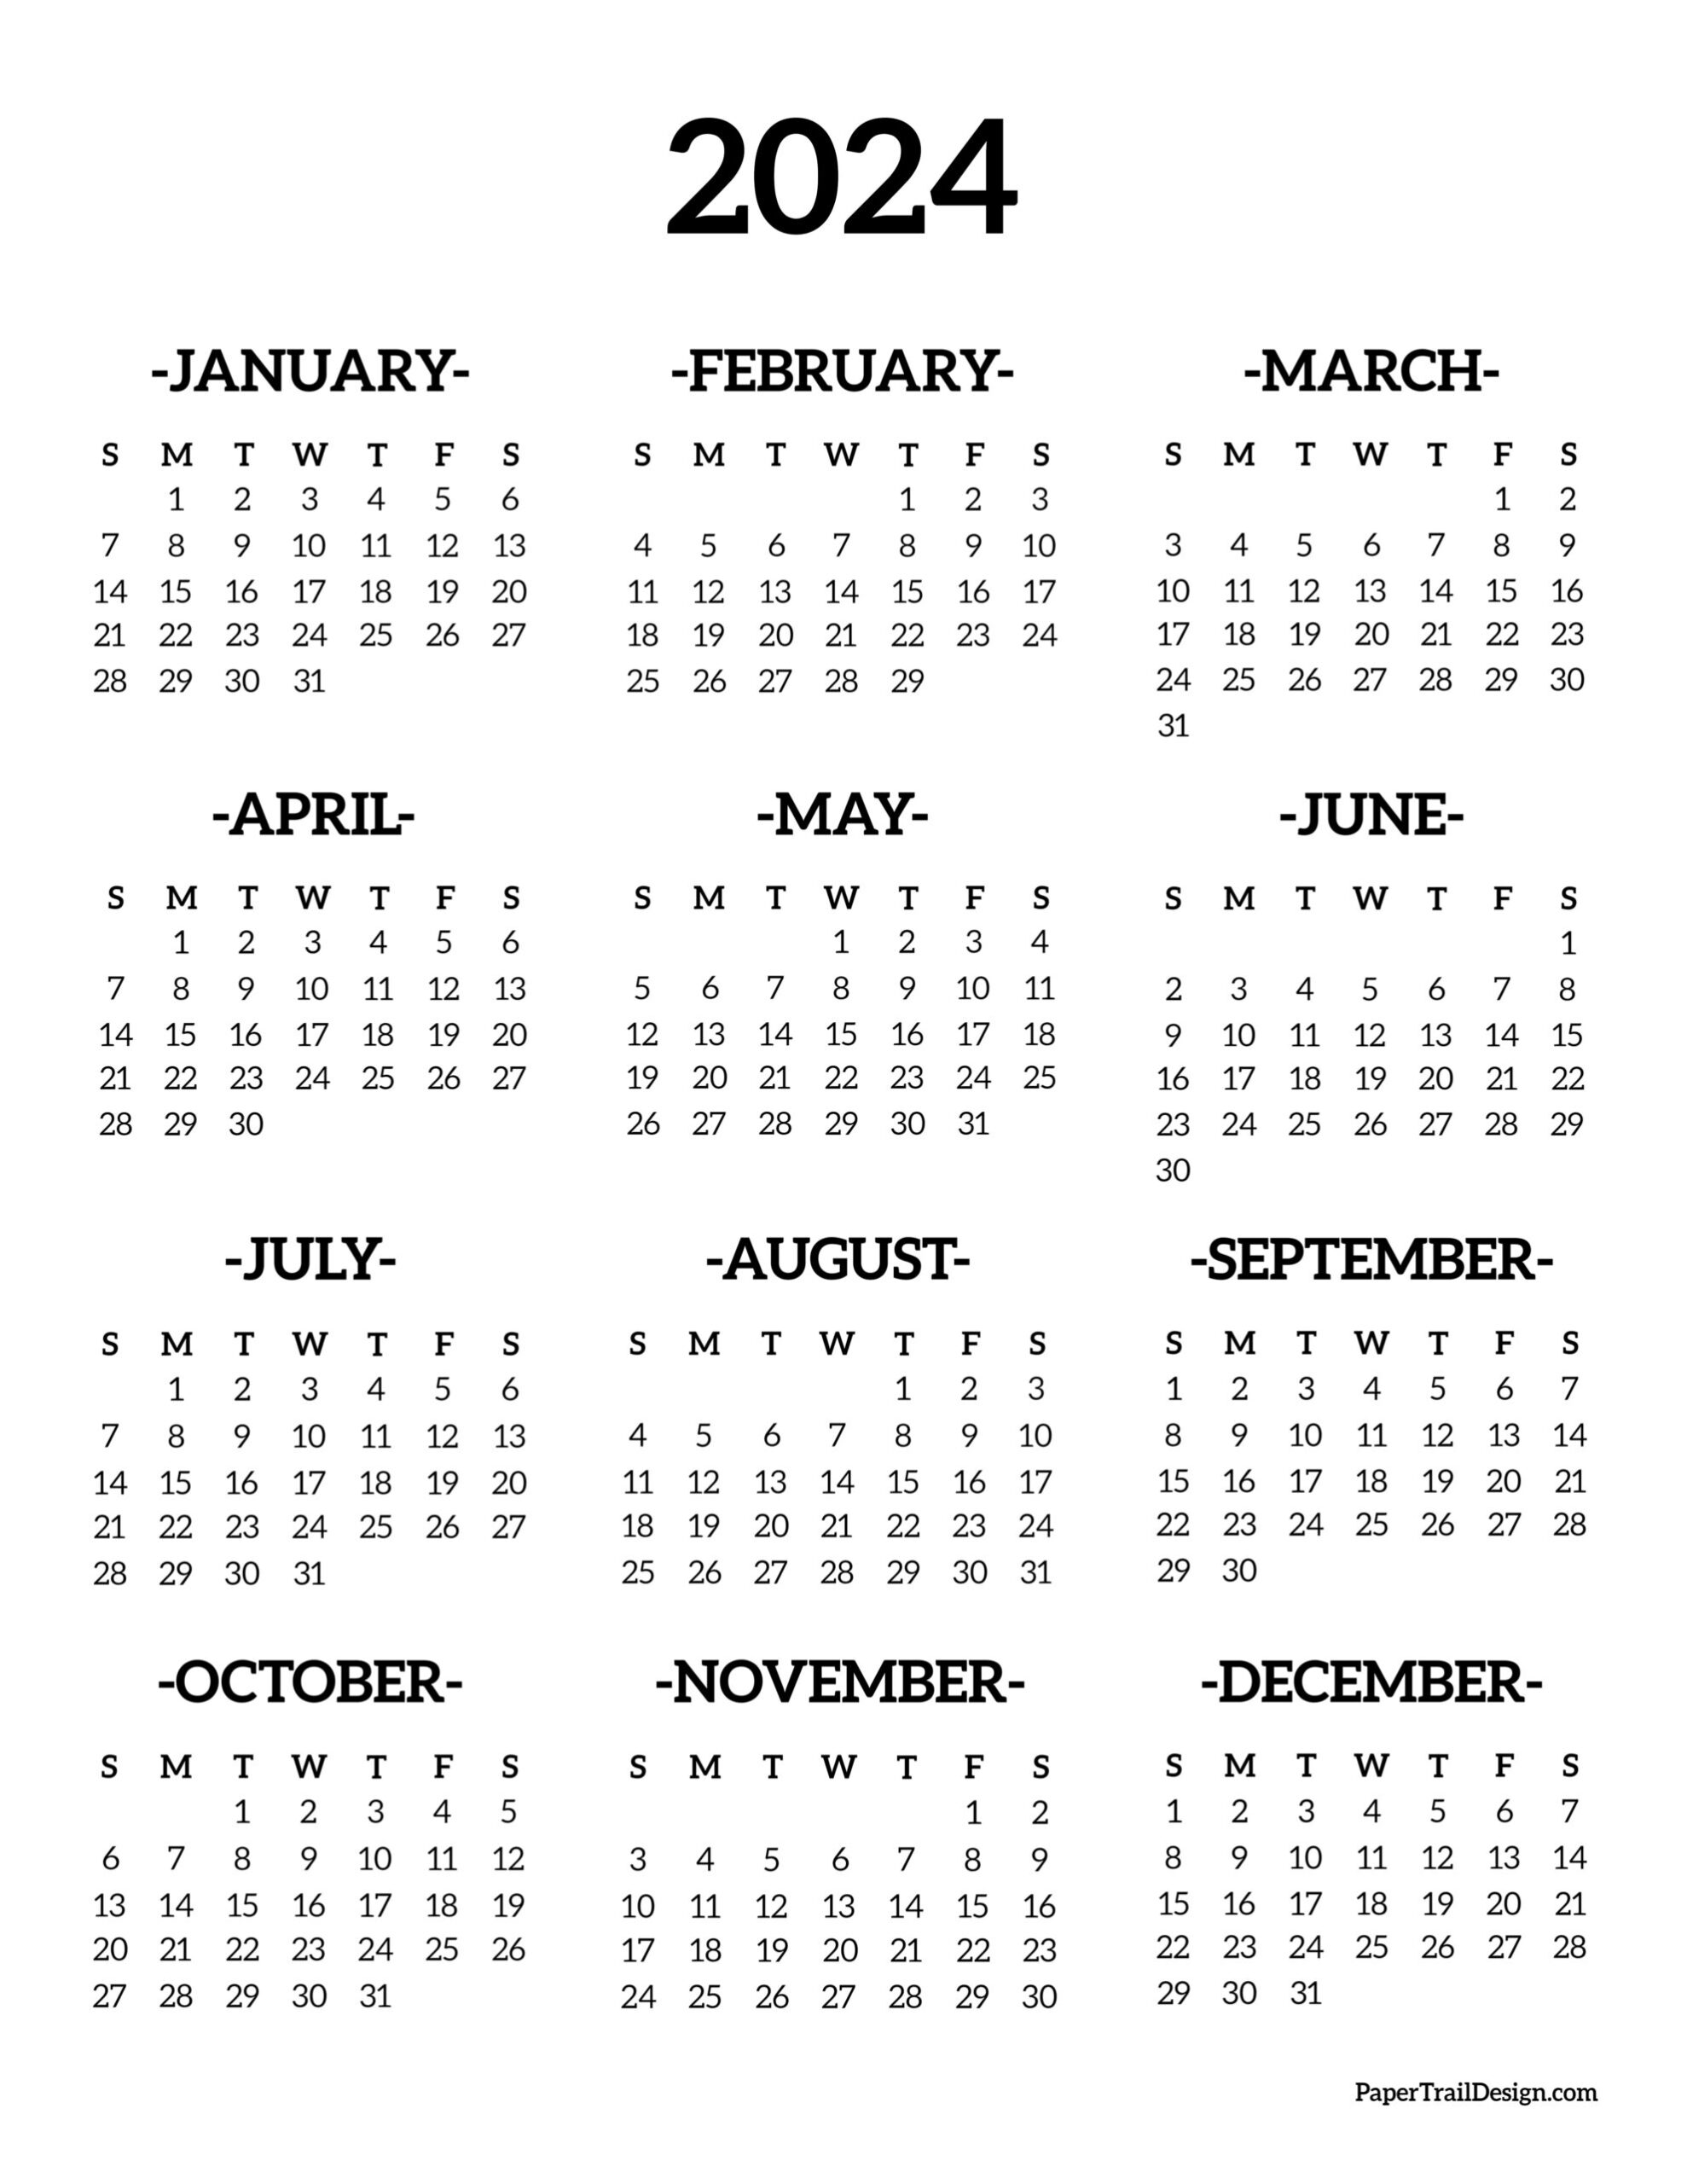 Calendar 2024 Printable One Page - Paper Trail Design for Full Year 2024 Calendar Printable